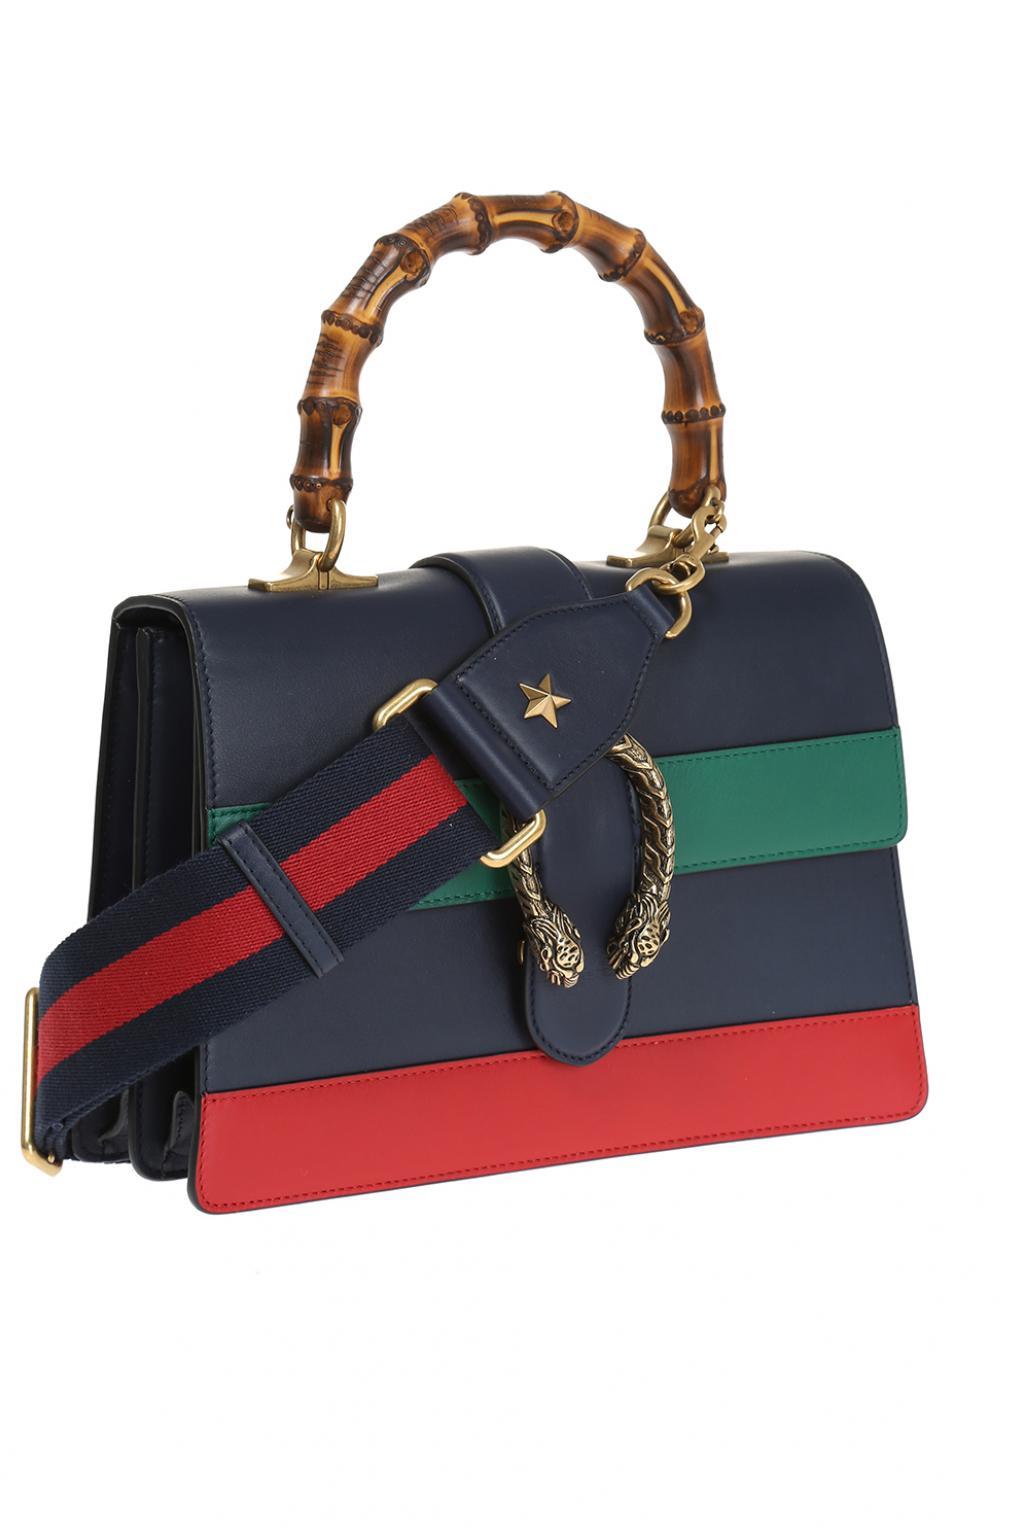 Gucci Dionysus Bamboo Medium Leather Shoulder Bag in Navy Blue (Blue) - Lyst